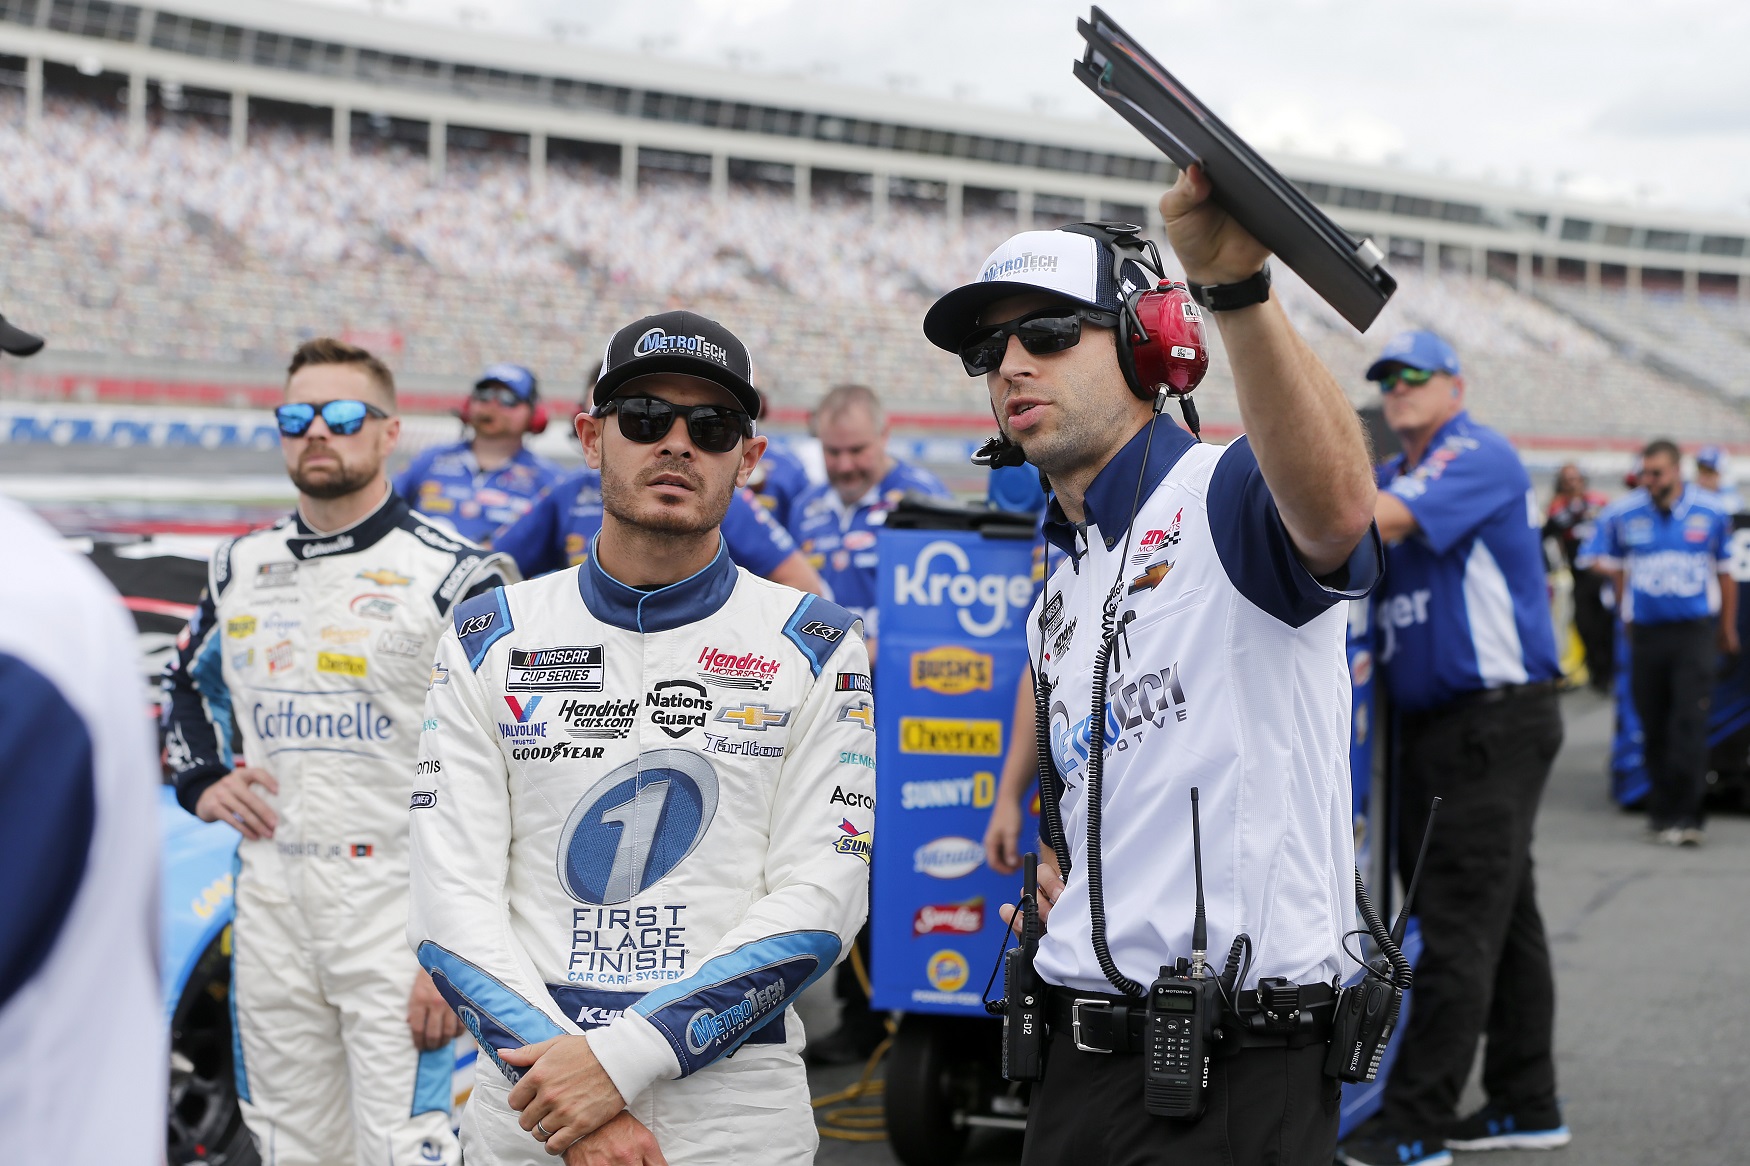 Kyle Larson and crew chief Cliff Daniels talk on the grid during qualifying for the NASCAR Cup Series Coca-Cola 600 at Charlotte Motor Speedway on May 29, 2021. | Brian Lawdermilk/Getty Images